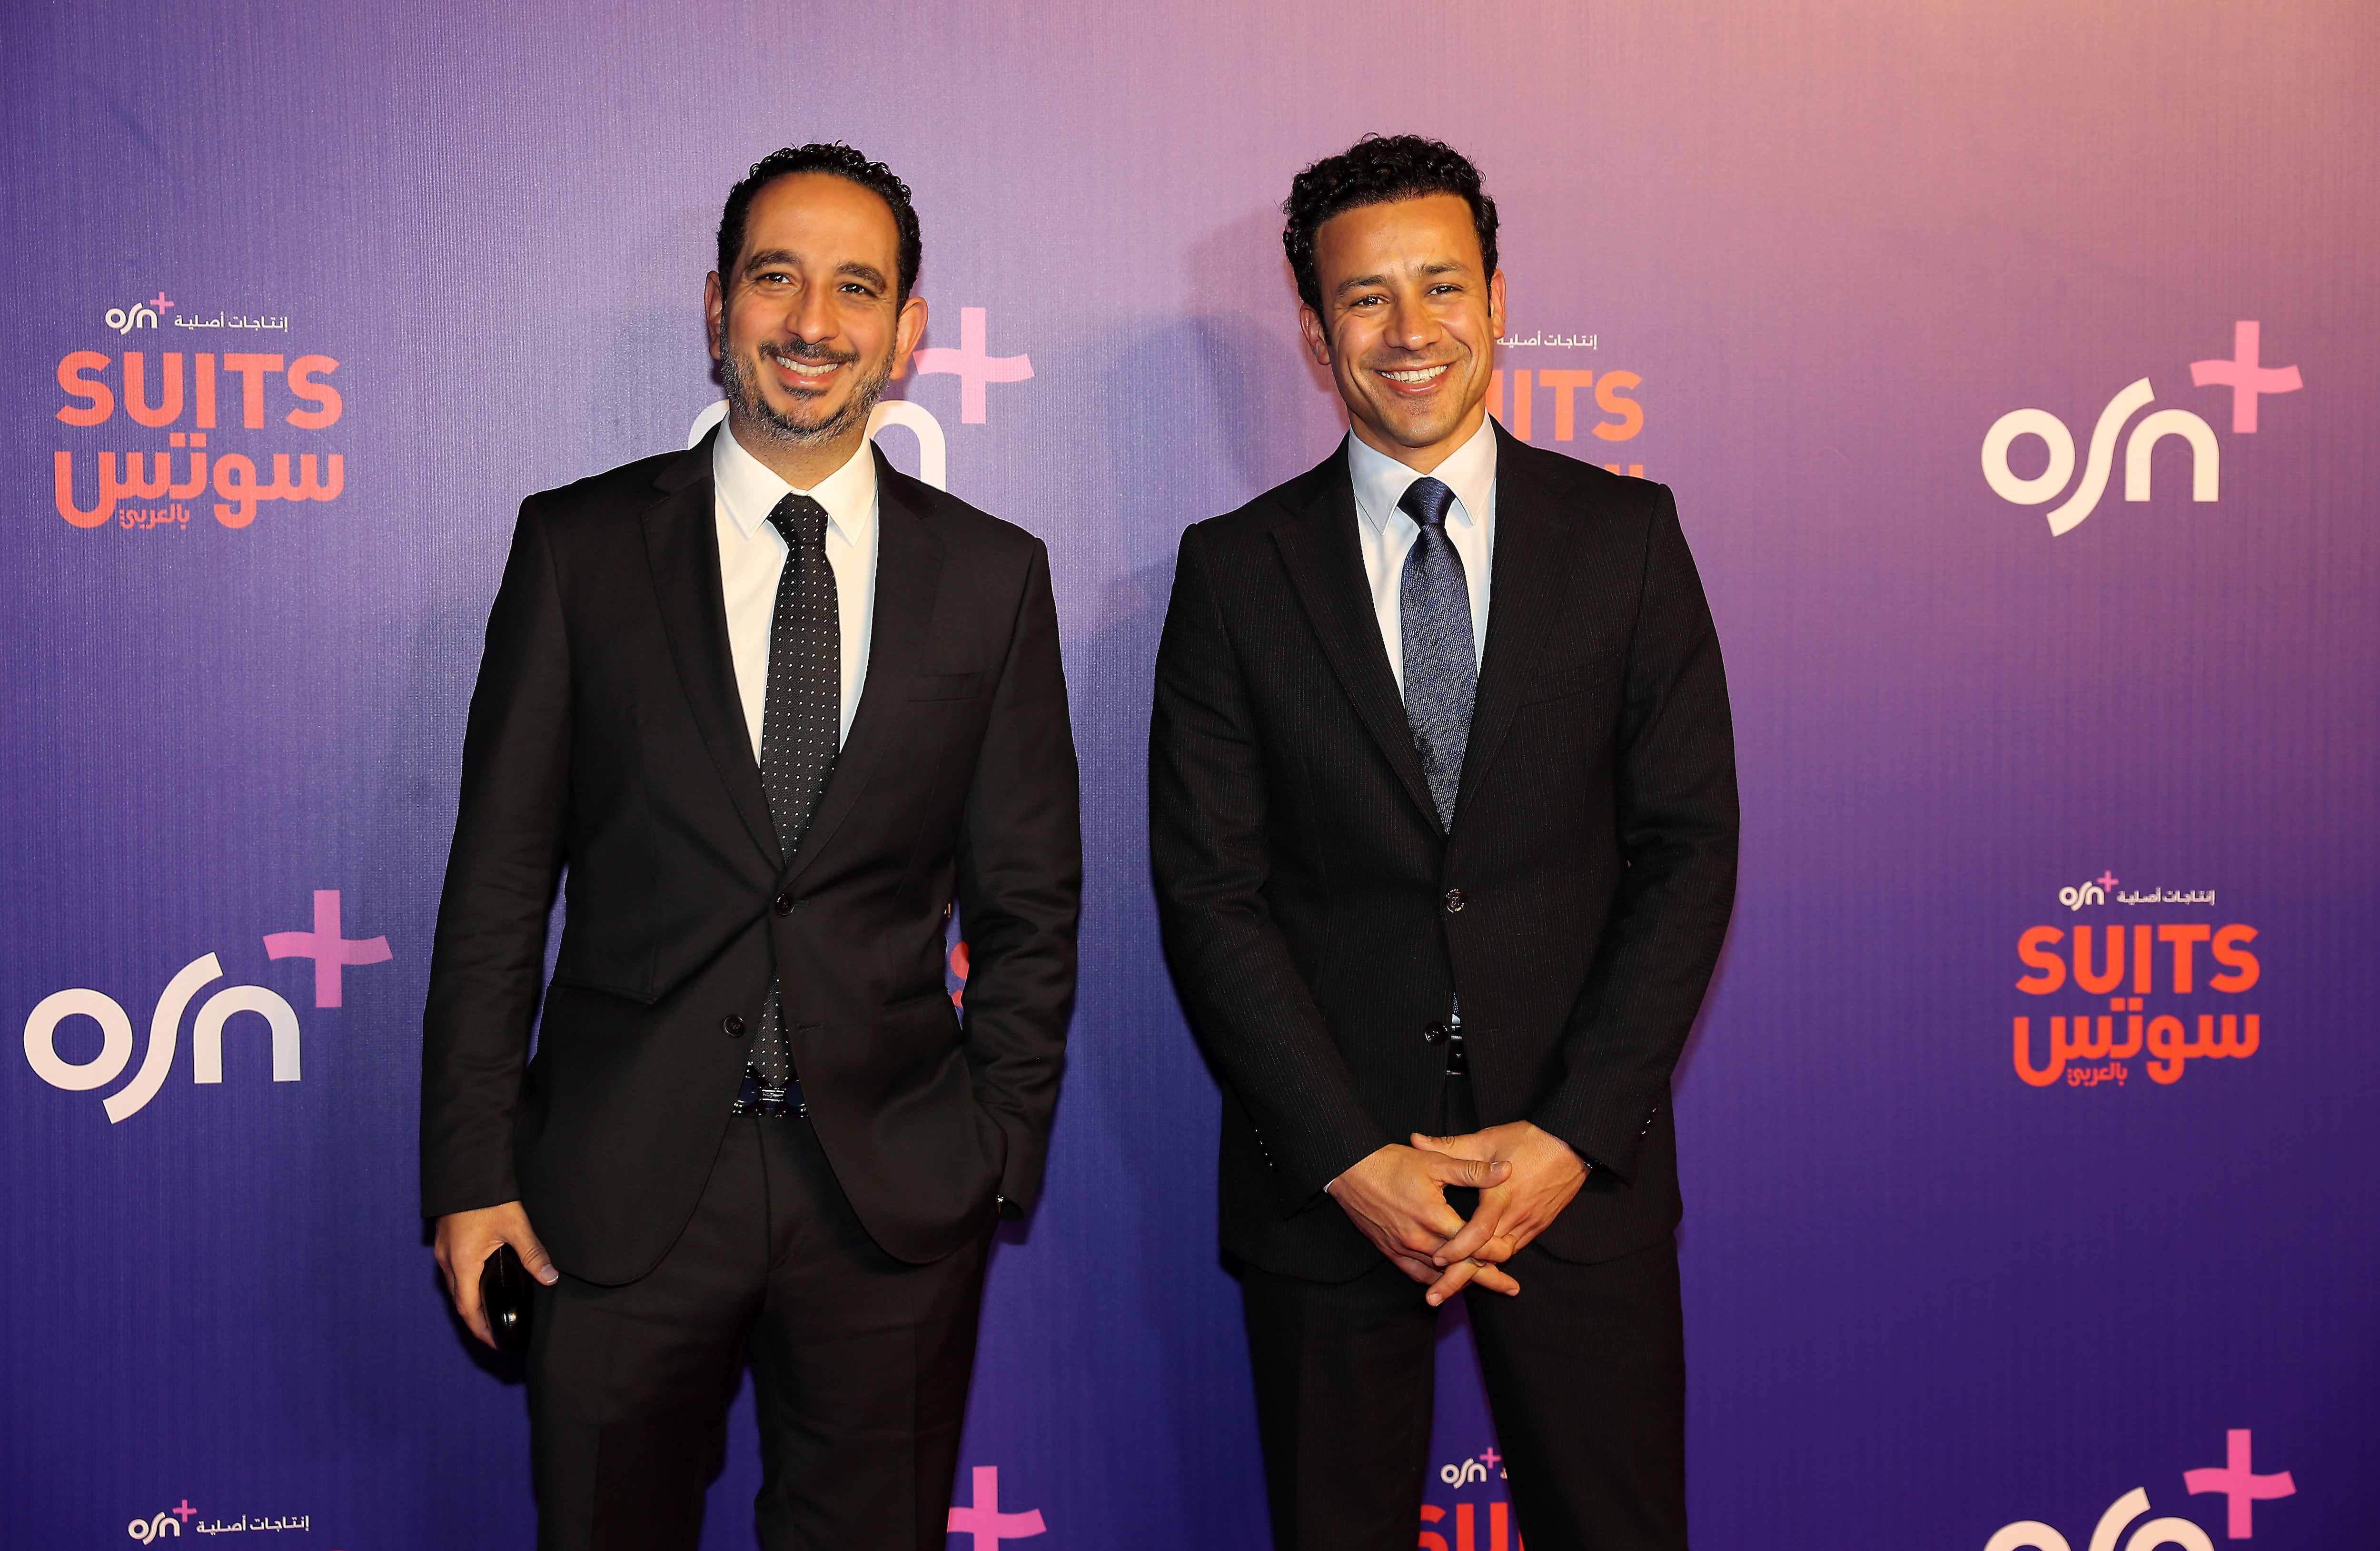 Stars of Arabic 'Suits' say their show is familiar but with a